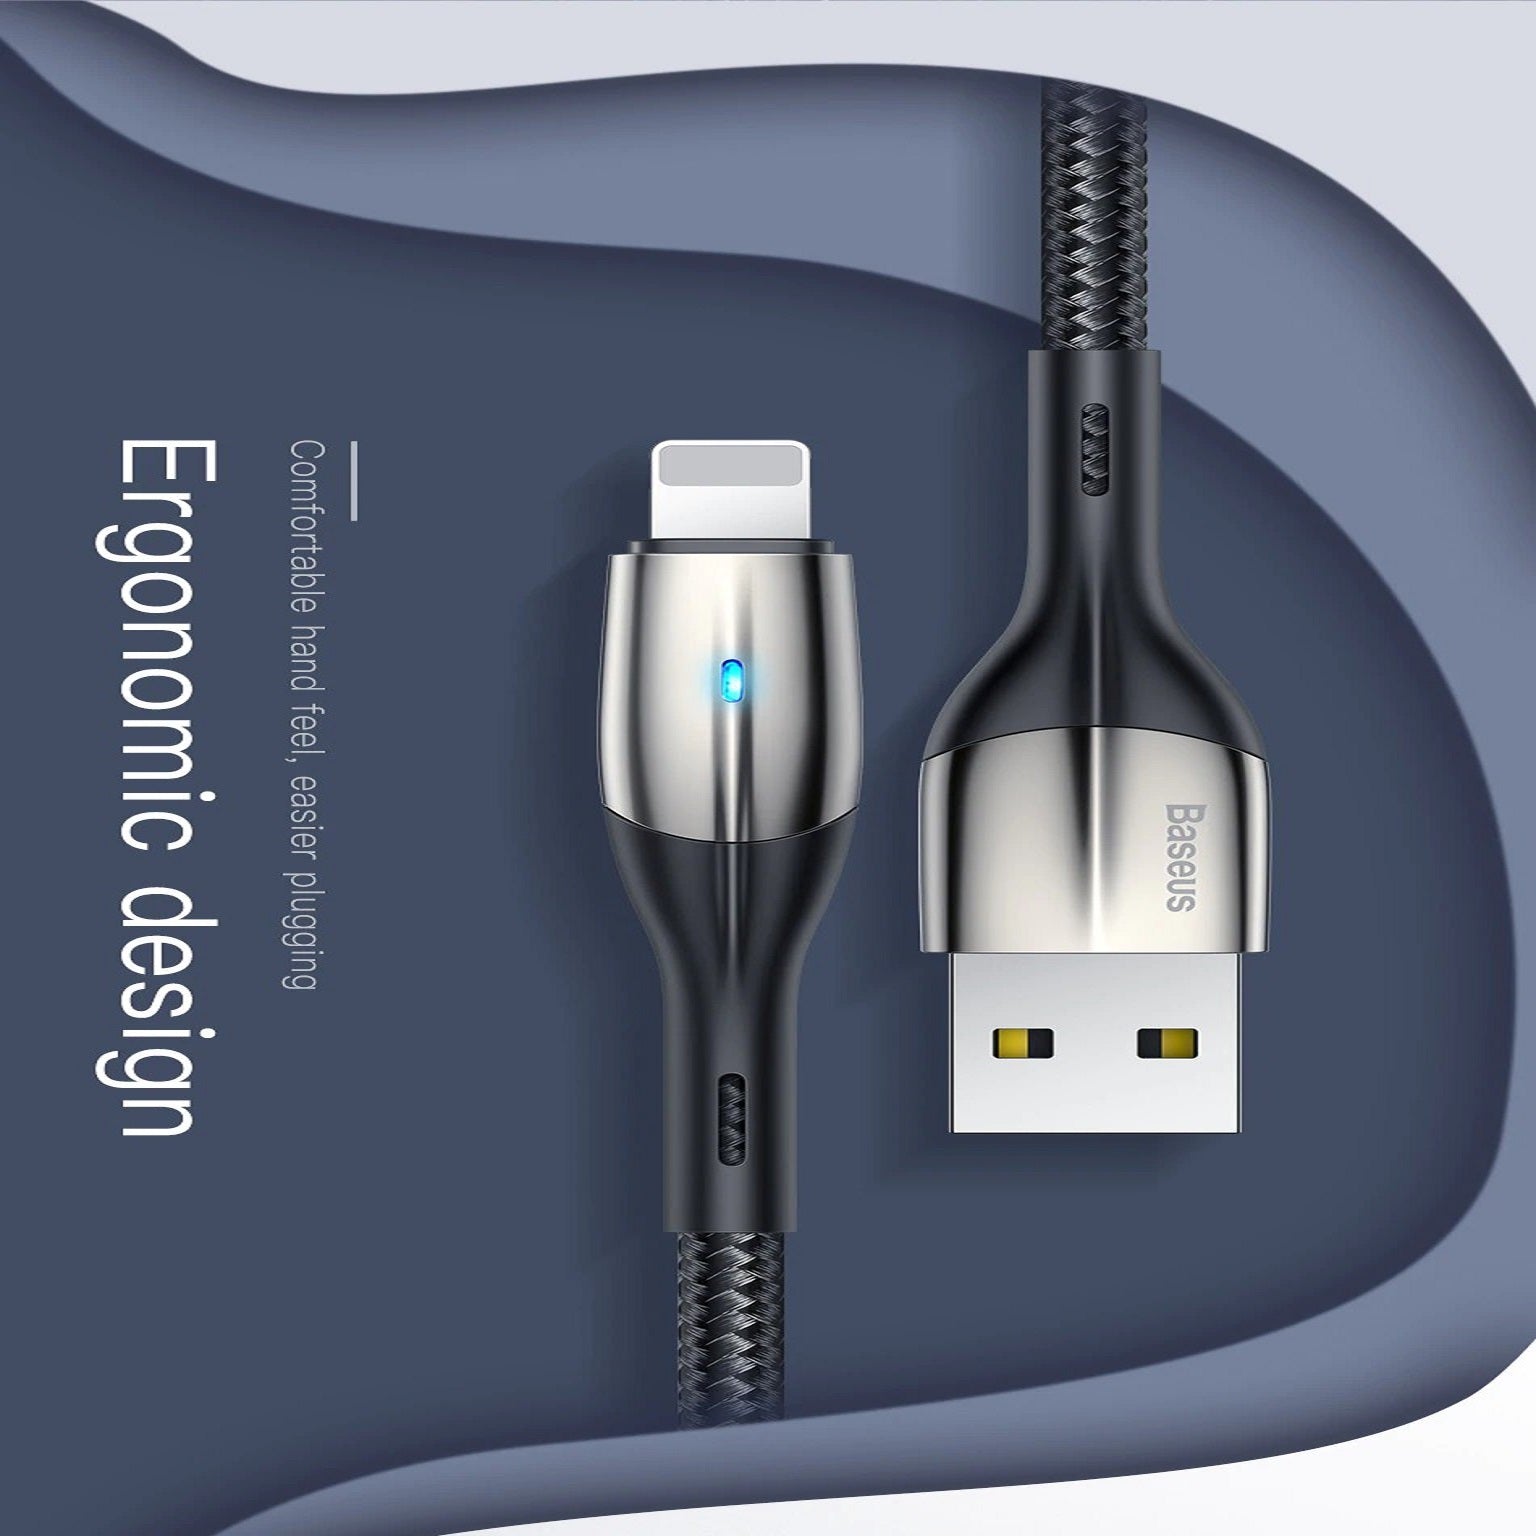 Baseus 2.4A Fast Charging Lightning USB Data Cable cum Charging Cable for iPhone